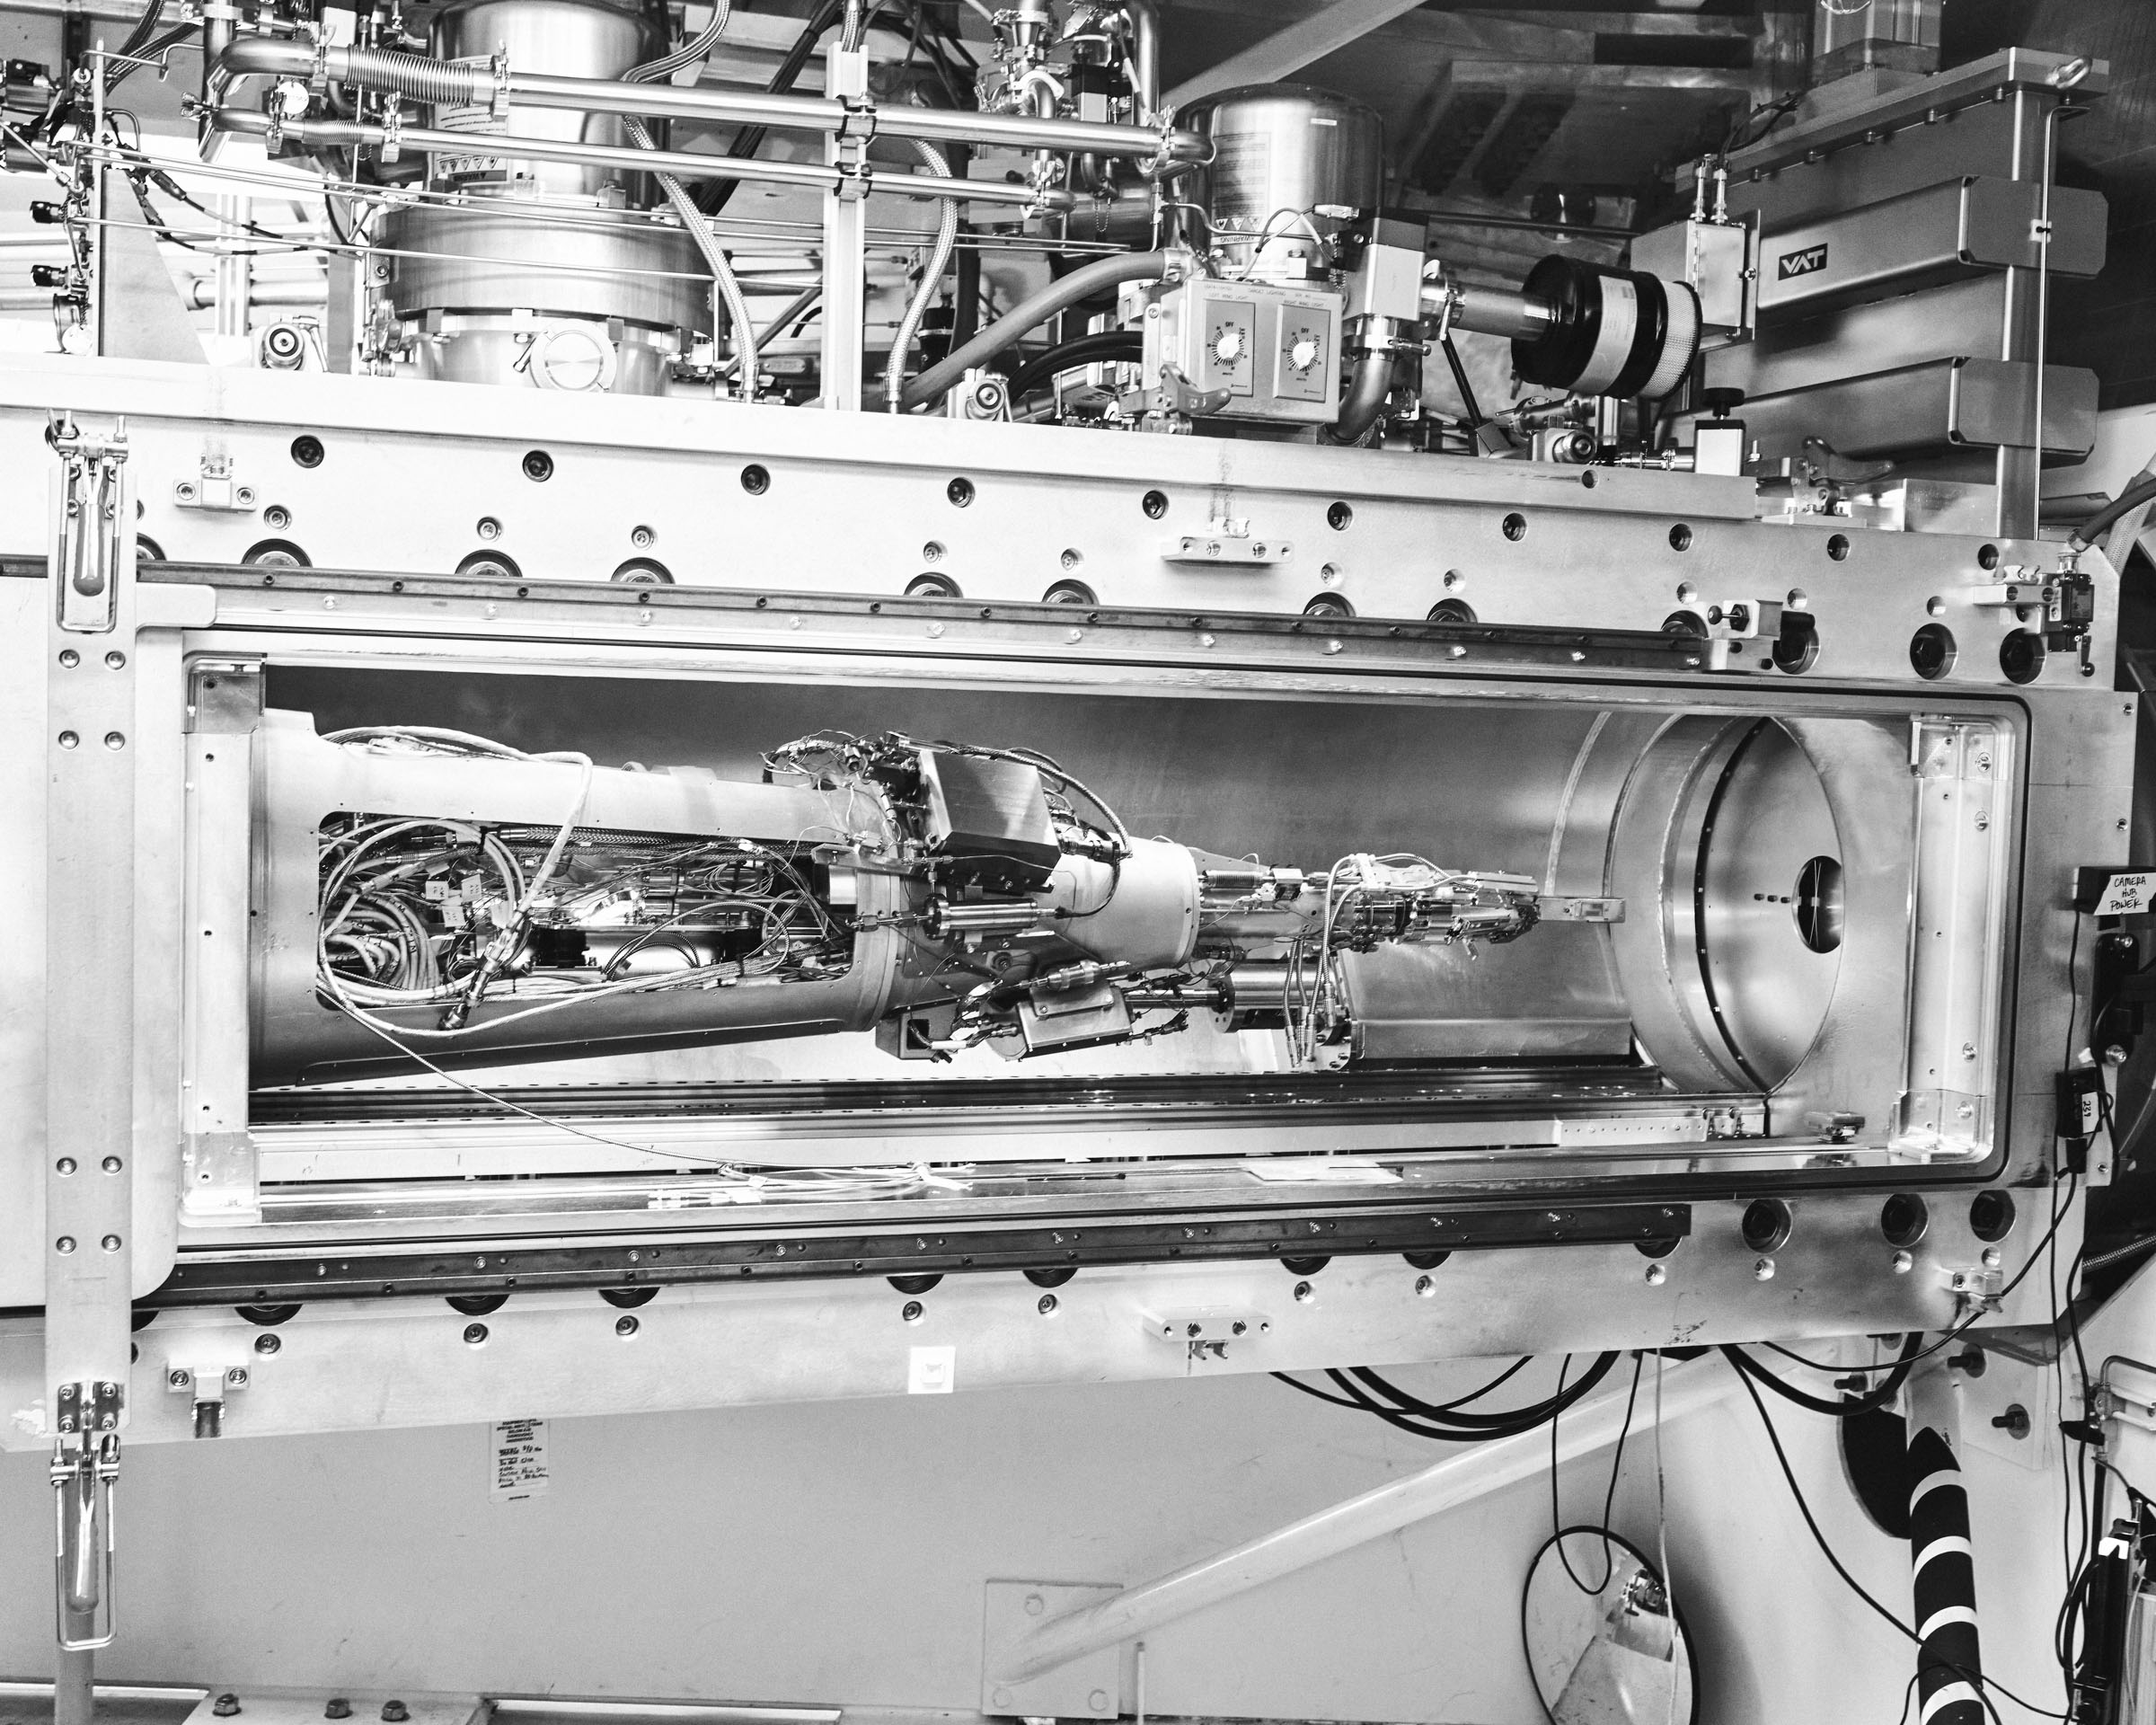 CRYOgenic target positioner in the Target Bay at the National Ignition Facility, Lawrence Livermore National Laboratory in Livermore, California, United States on December 8, 2023.